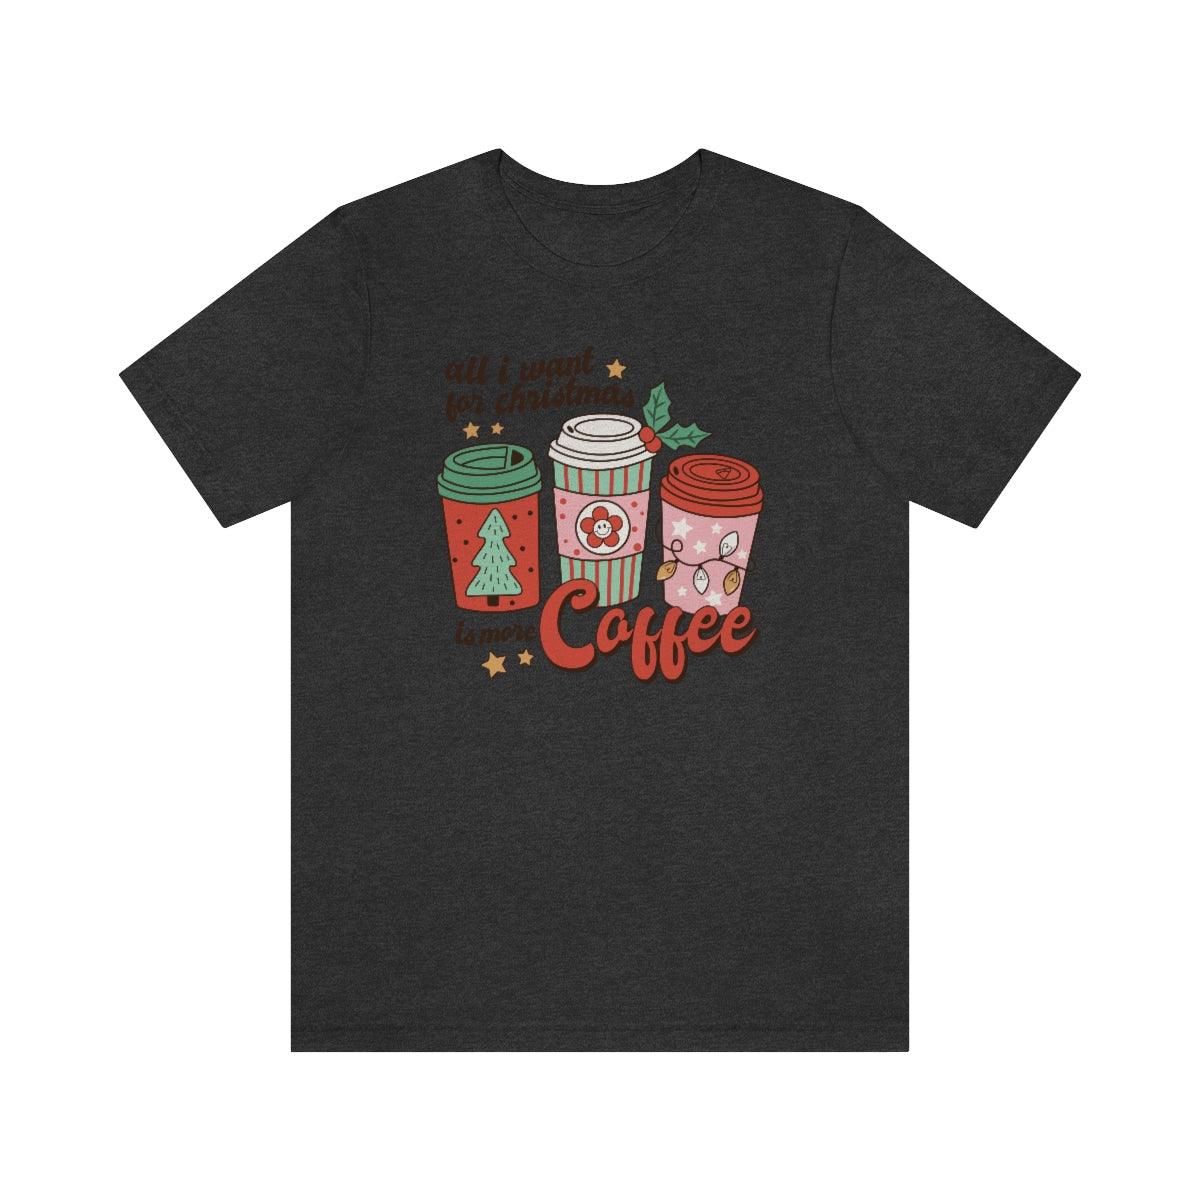 Retro All I want For Christmas Is More Coffee Christmas Shirt Short Sleeve Tee - Crystal Rose Design Co.